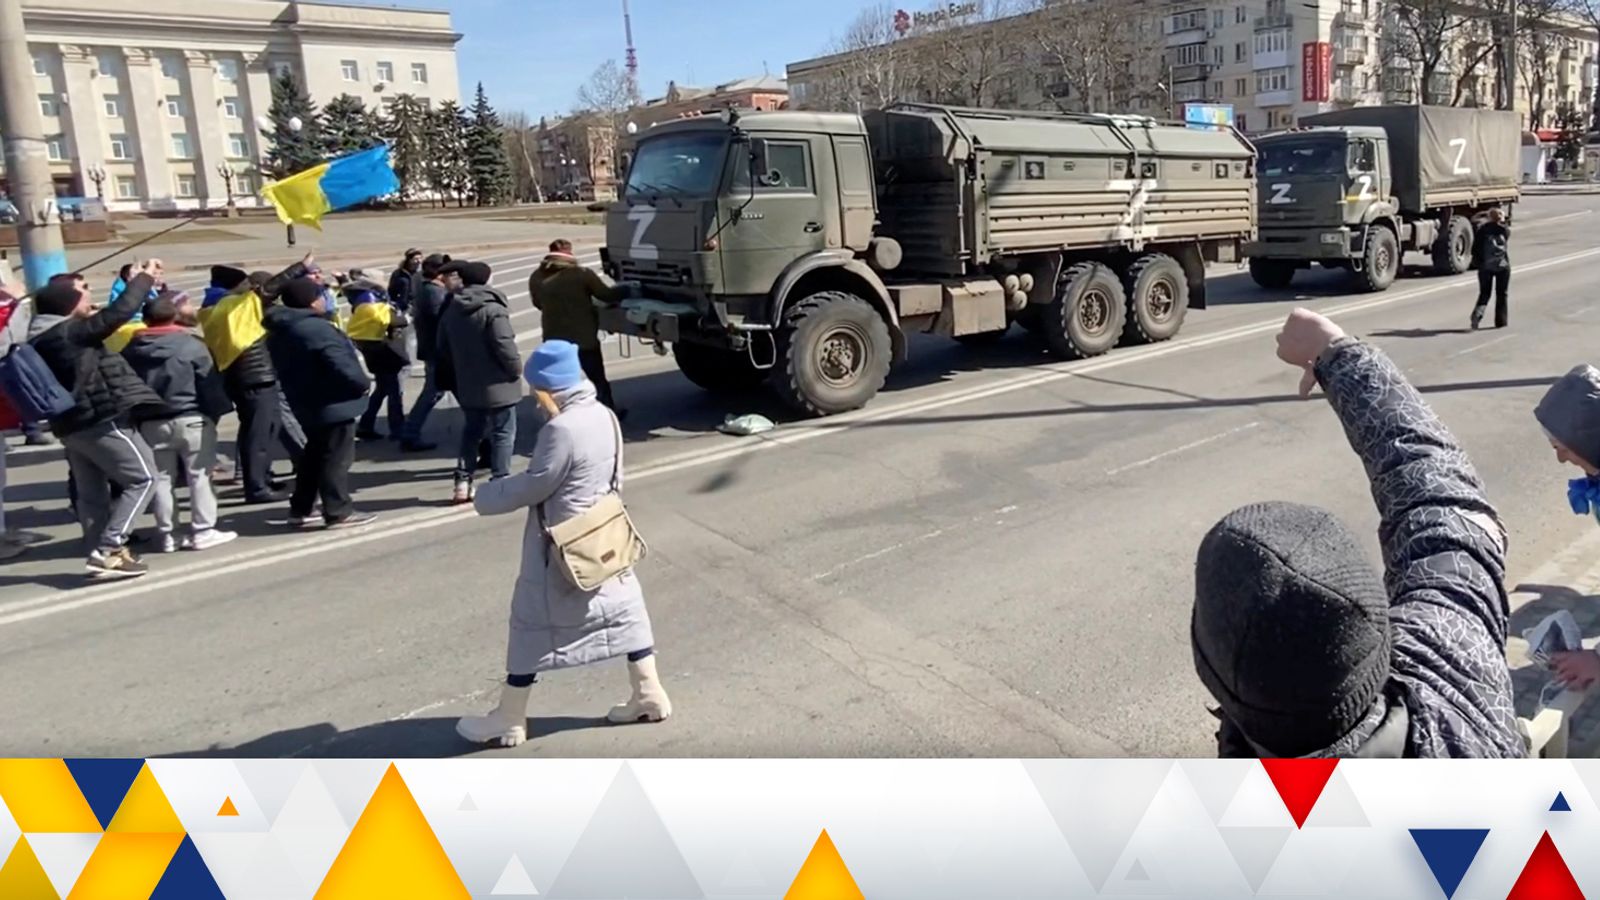 Ukraine war: Kherson residents tell Russian forces to 'go home' as they confront military vehicles